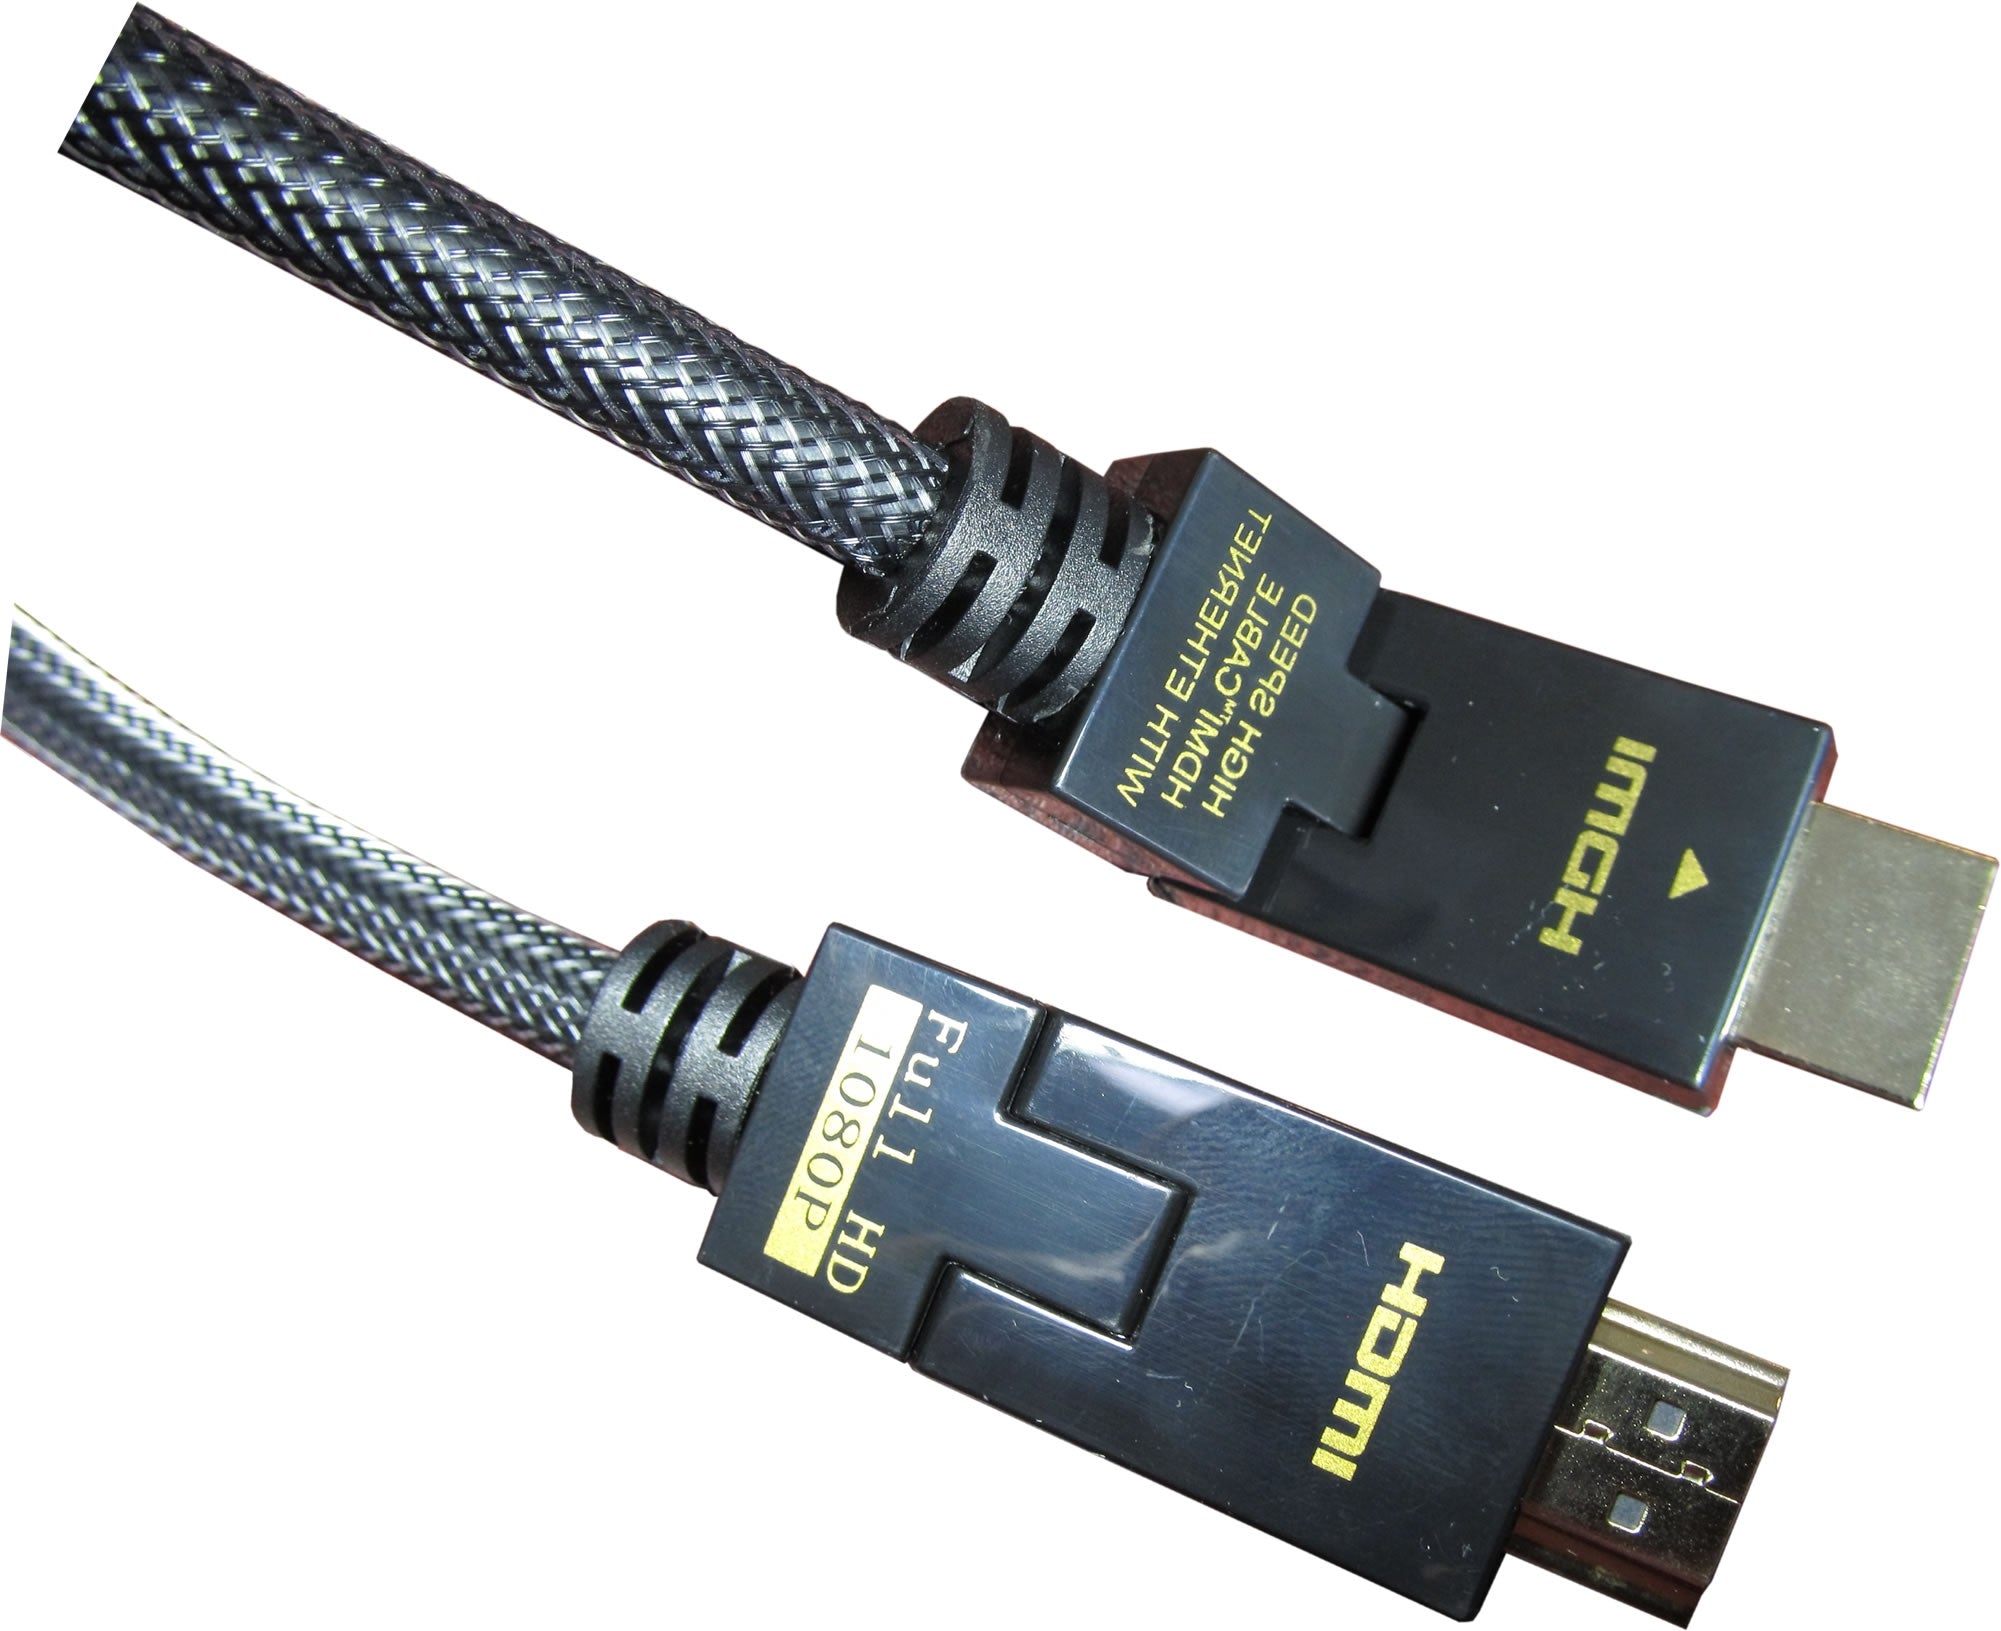 16-6325-10 HDMI High Speed Swivel Cable 4K 3D HDMI Cable version 1.4 - 10 Ft